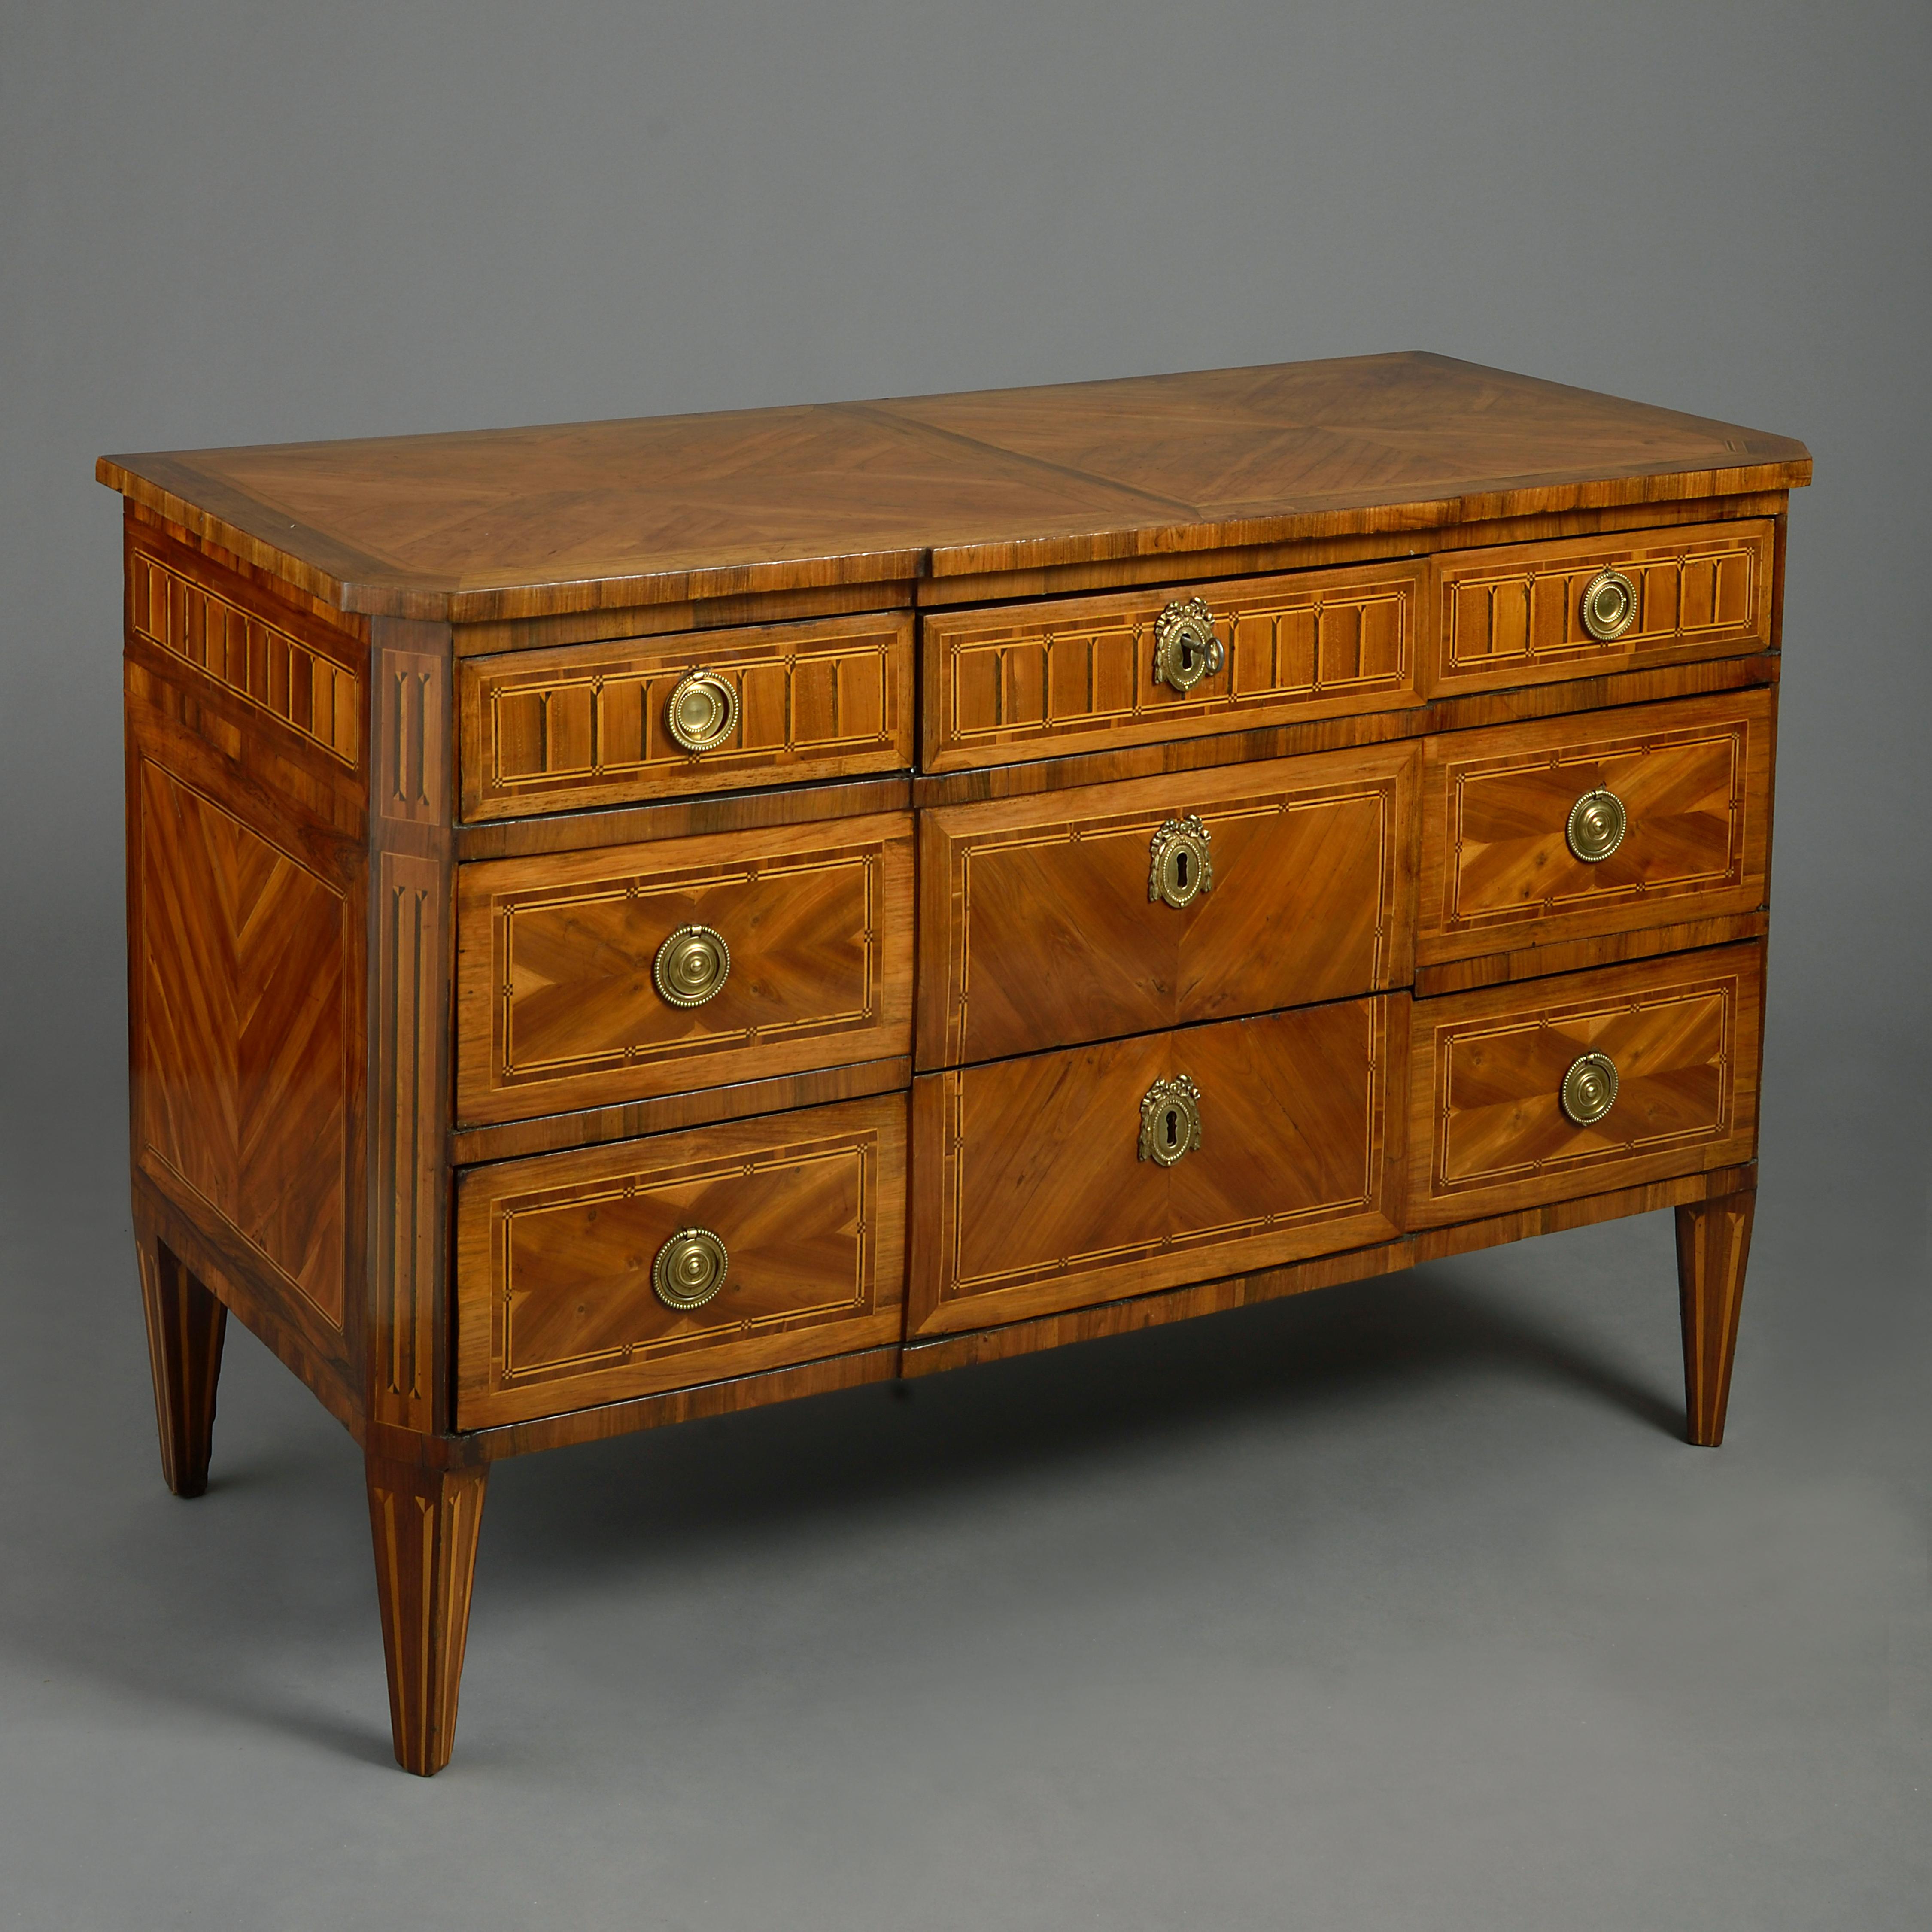 Italian Late 18th Century Neoclassical Parquetry Commode